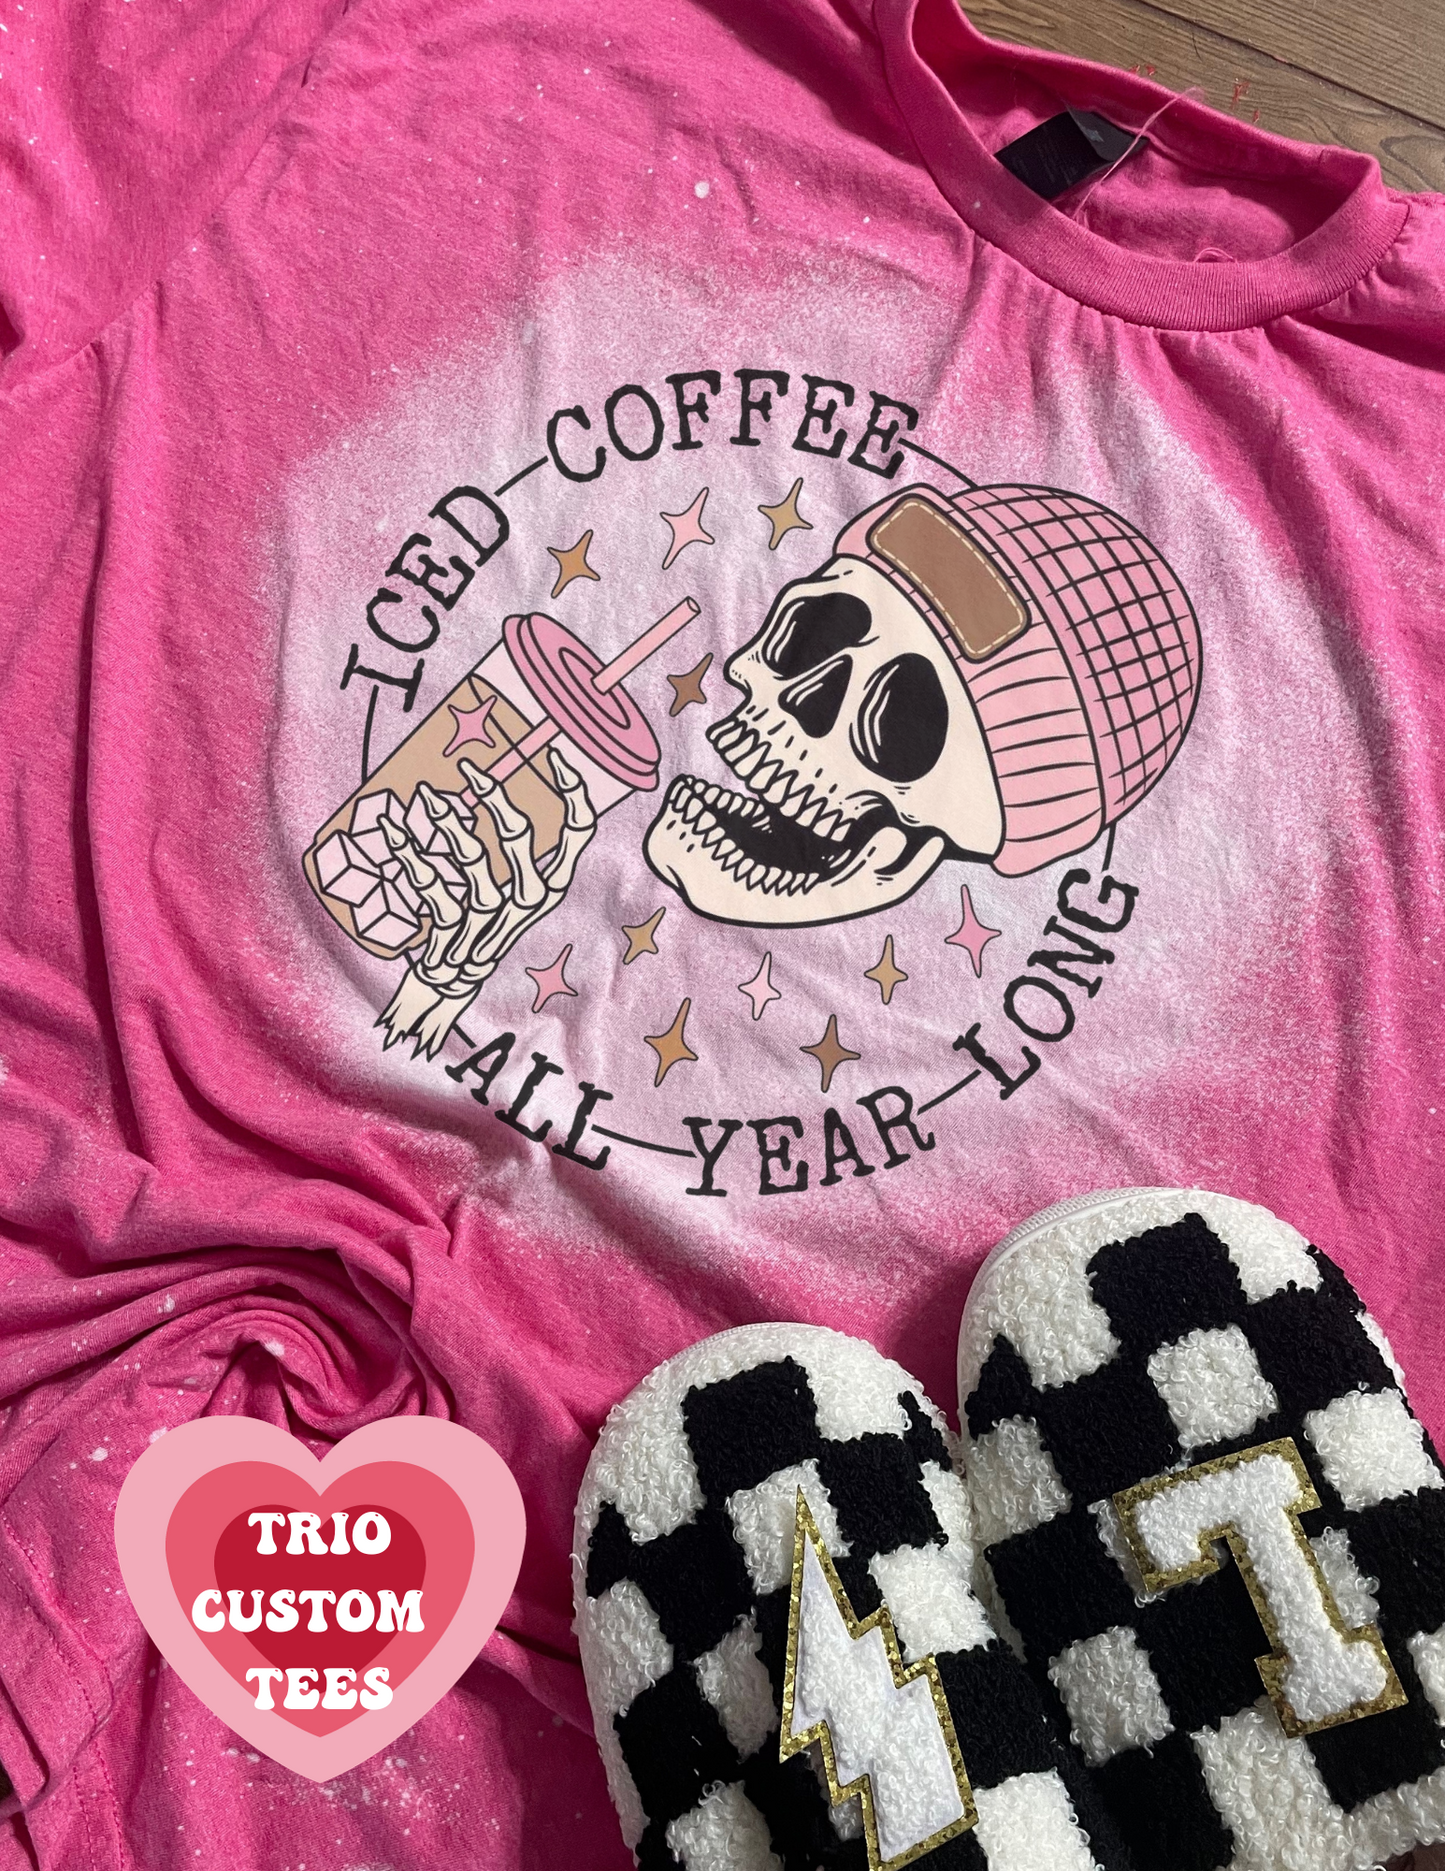 Iced Coffee All Year Long Skeleton Trendy Shirt